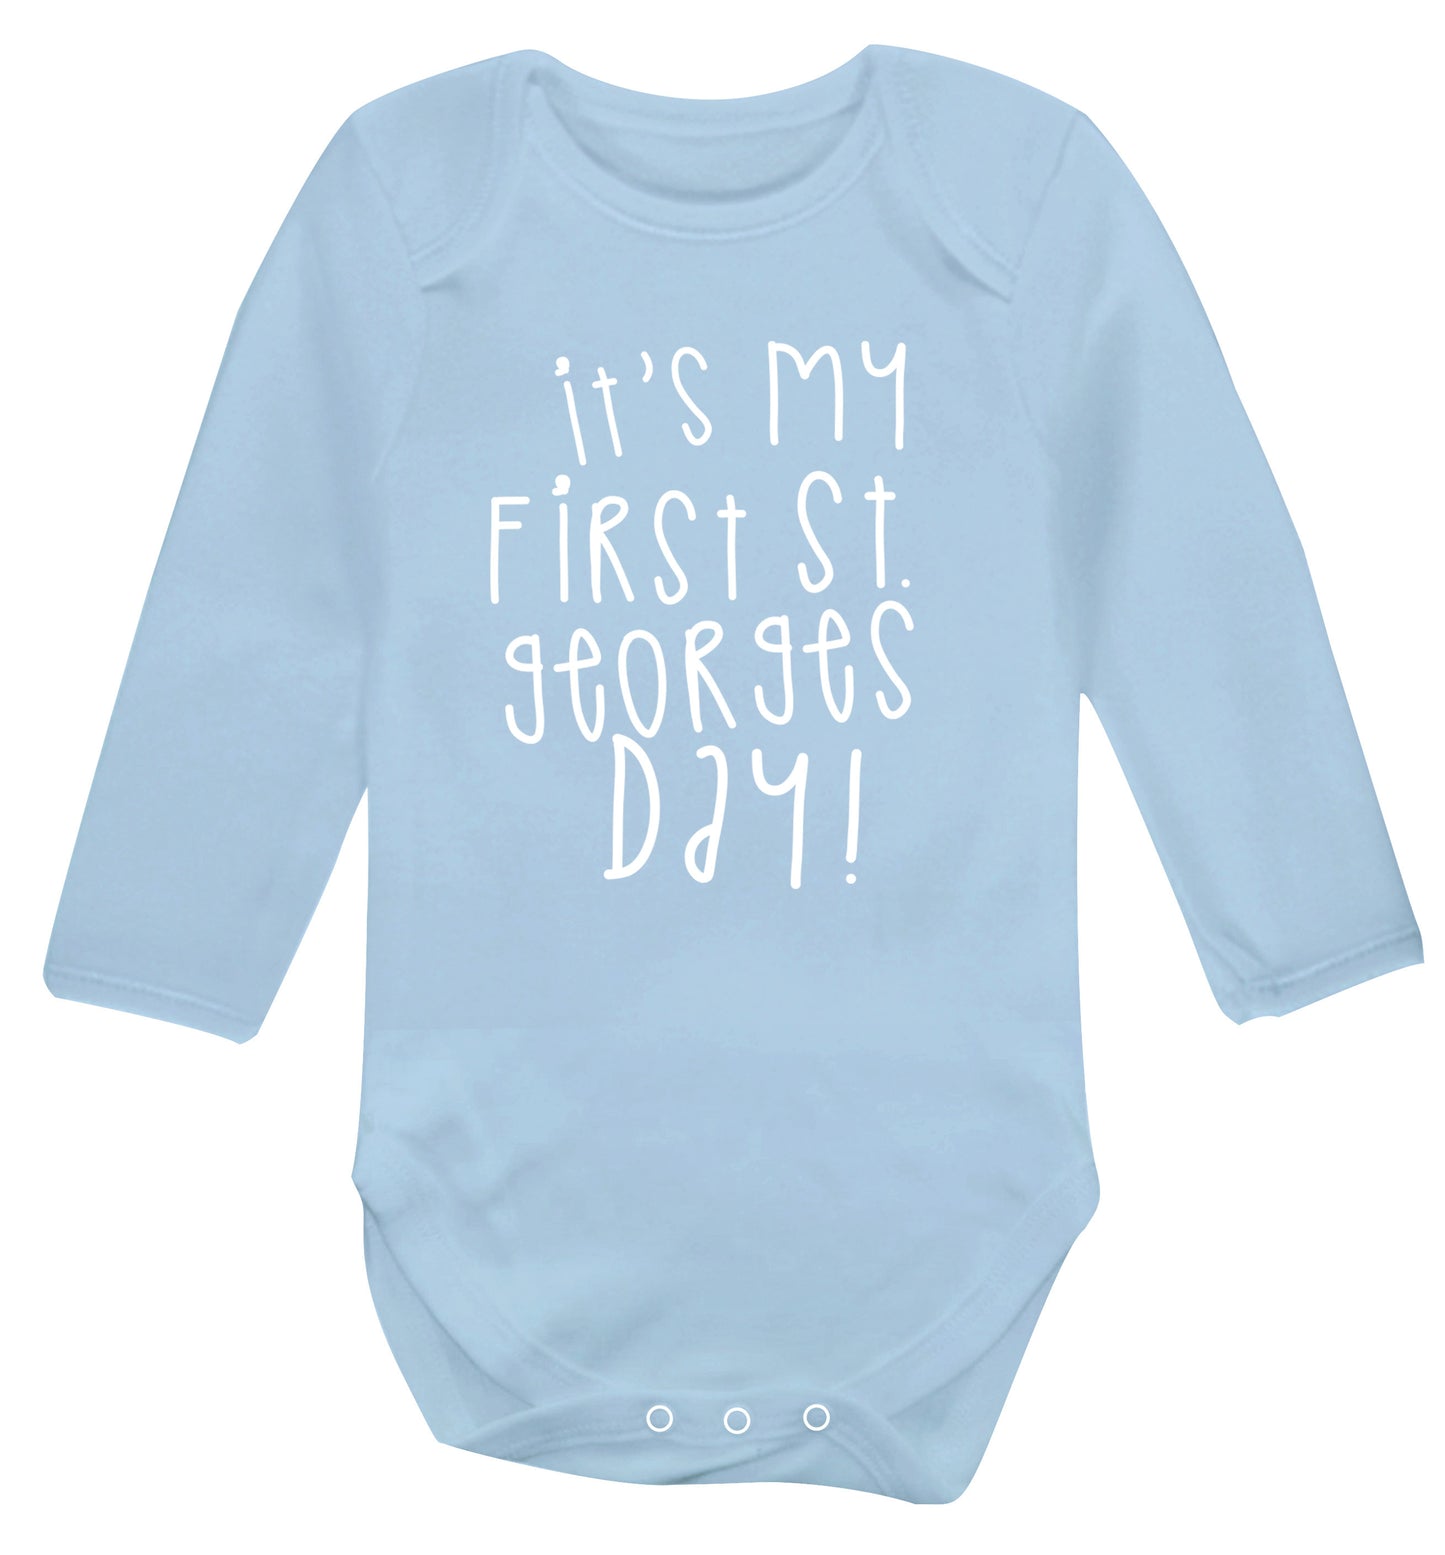 It's my first St Georges day Baby Vest long sleeved pale blue 6-12 months